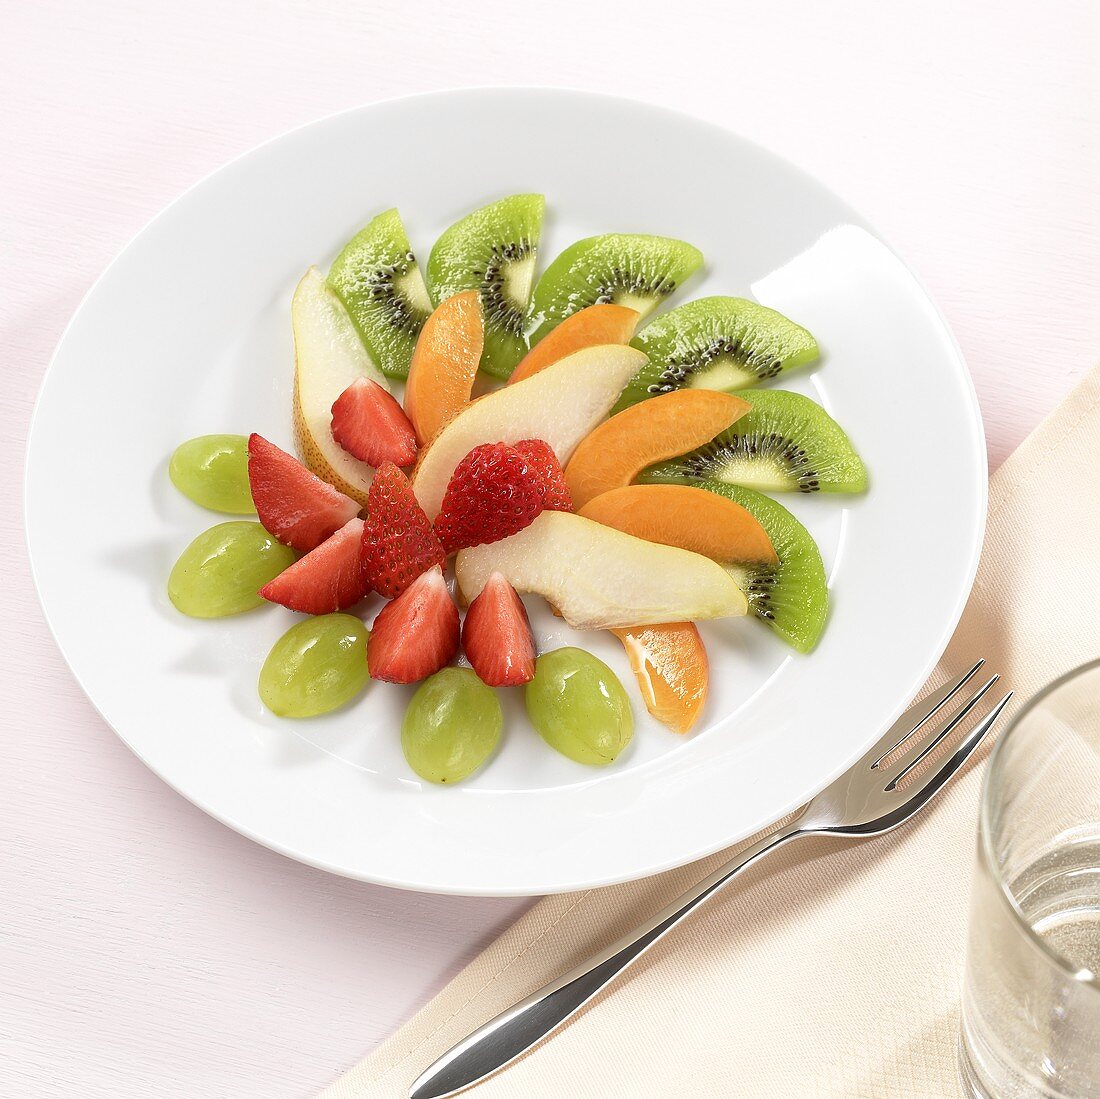 Fruit plate with grapes, strawberries, kiwi slices etc